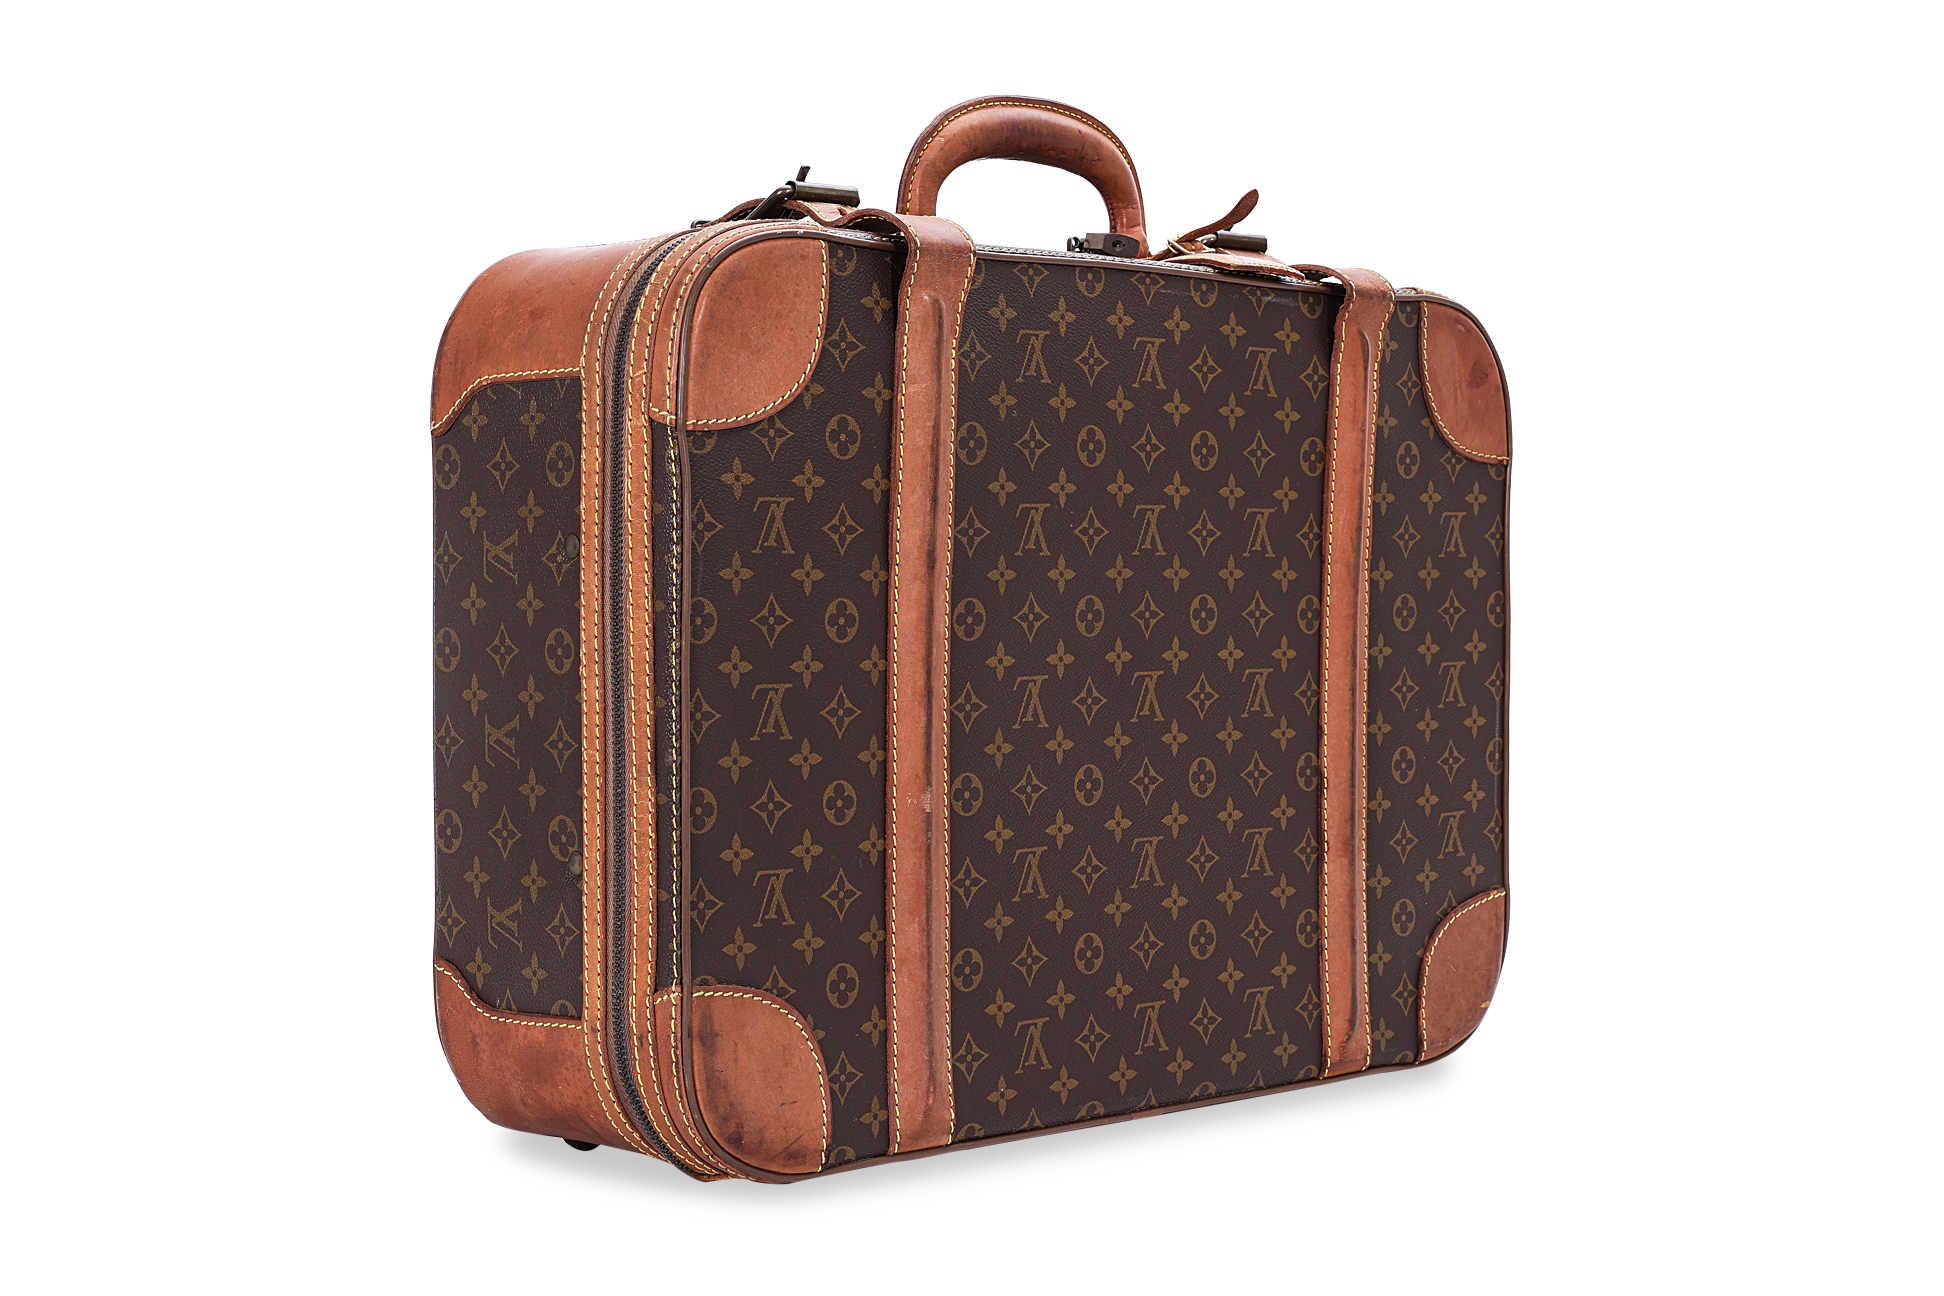 A LOUIS VUITTON LUGGAGE BAG - Image 2 of 4